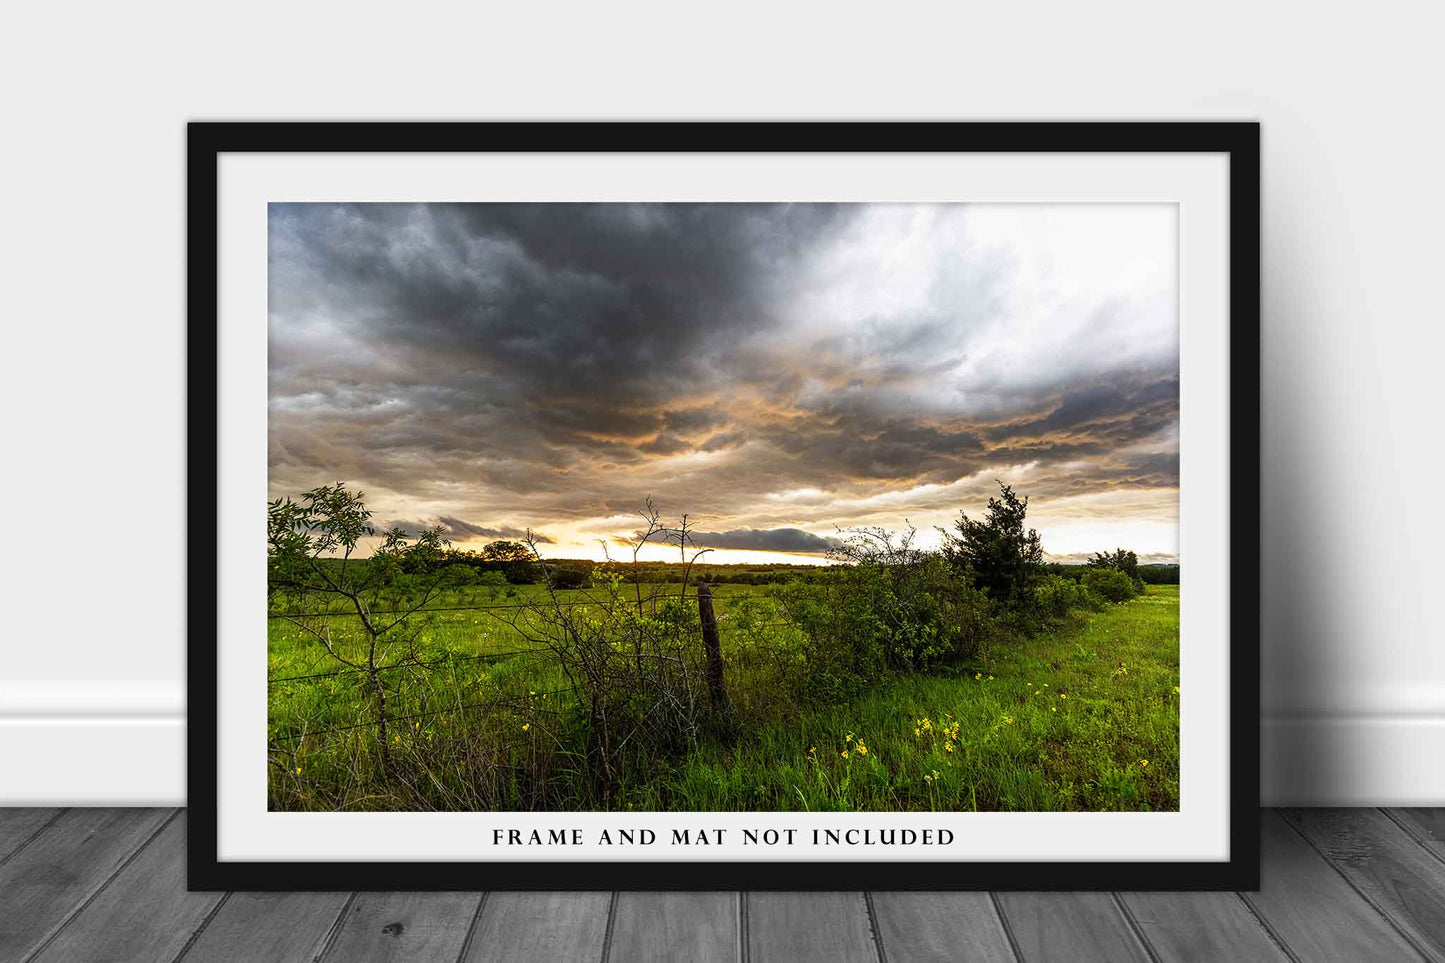 Country Photography Print - Picture of Stormy Sky Over Barbed Wire Fence Row at Sunset in Texas Landscape Wall Art Western Decor